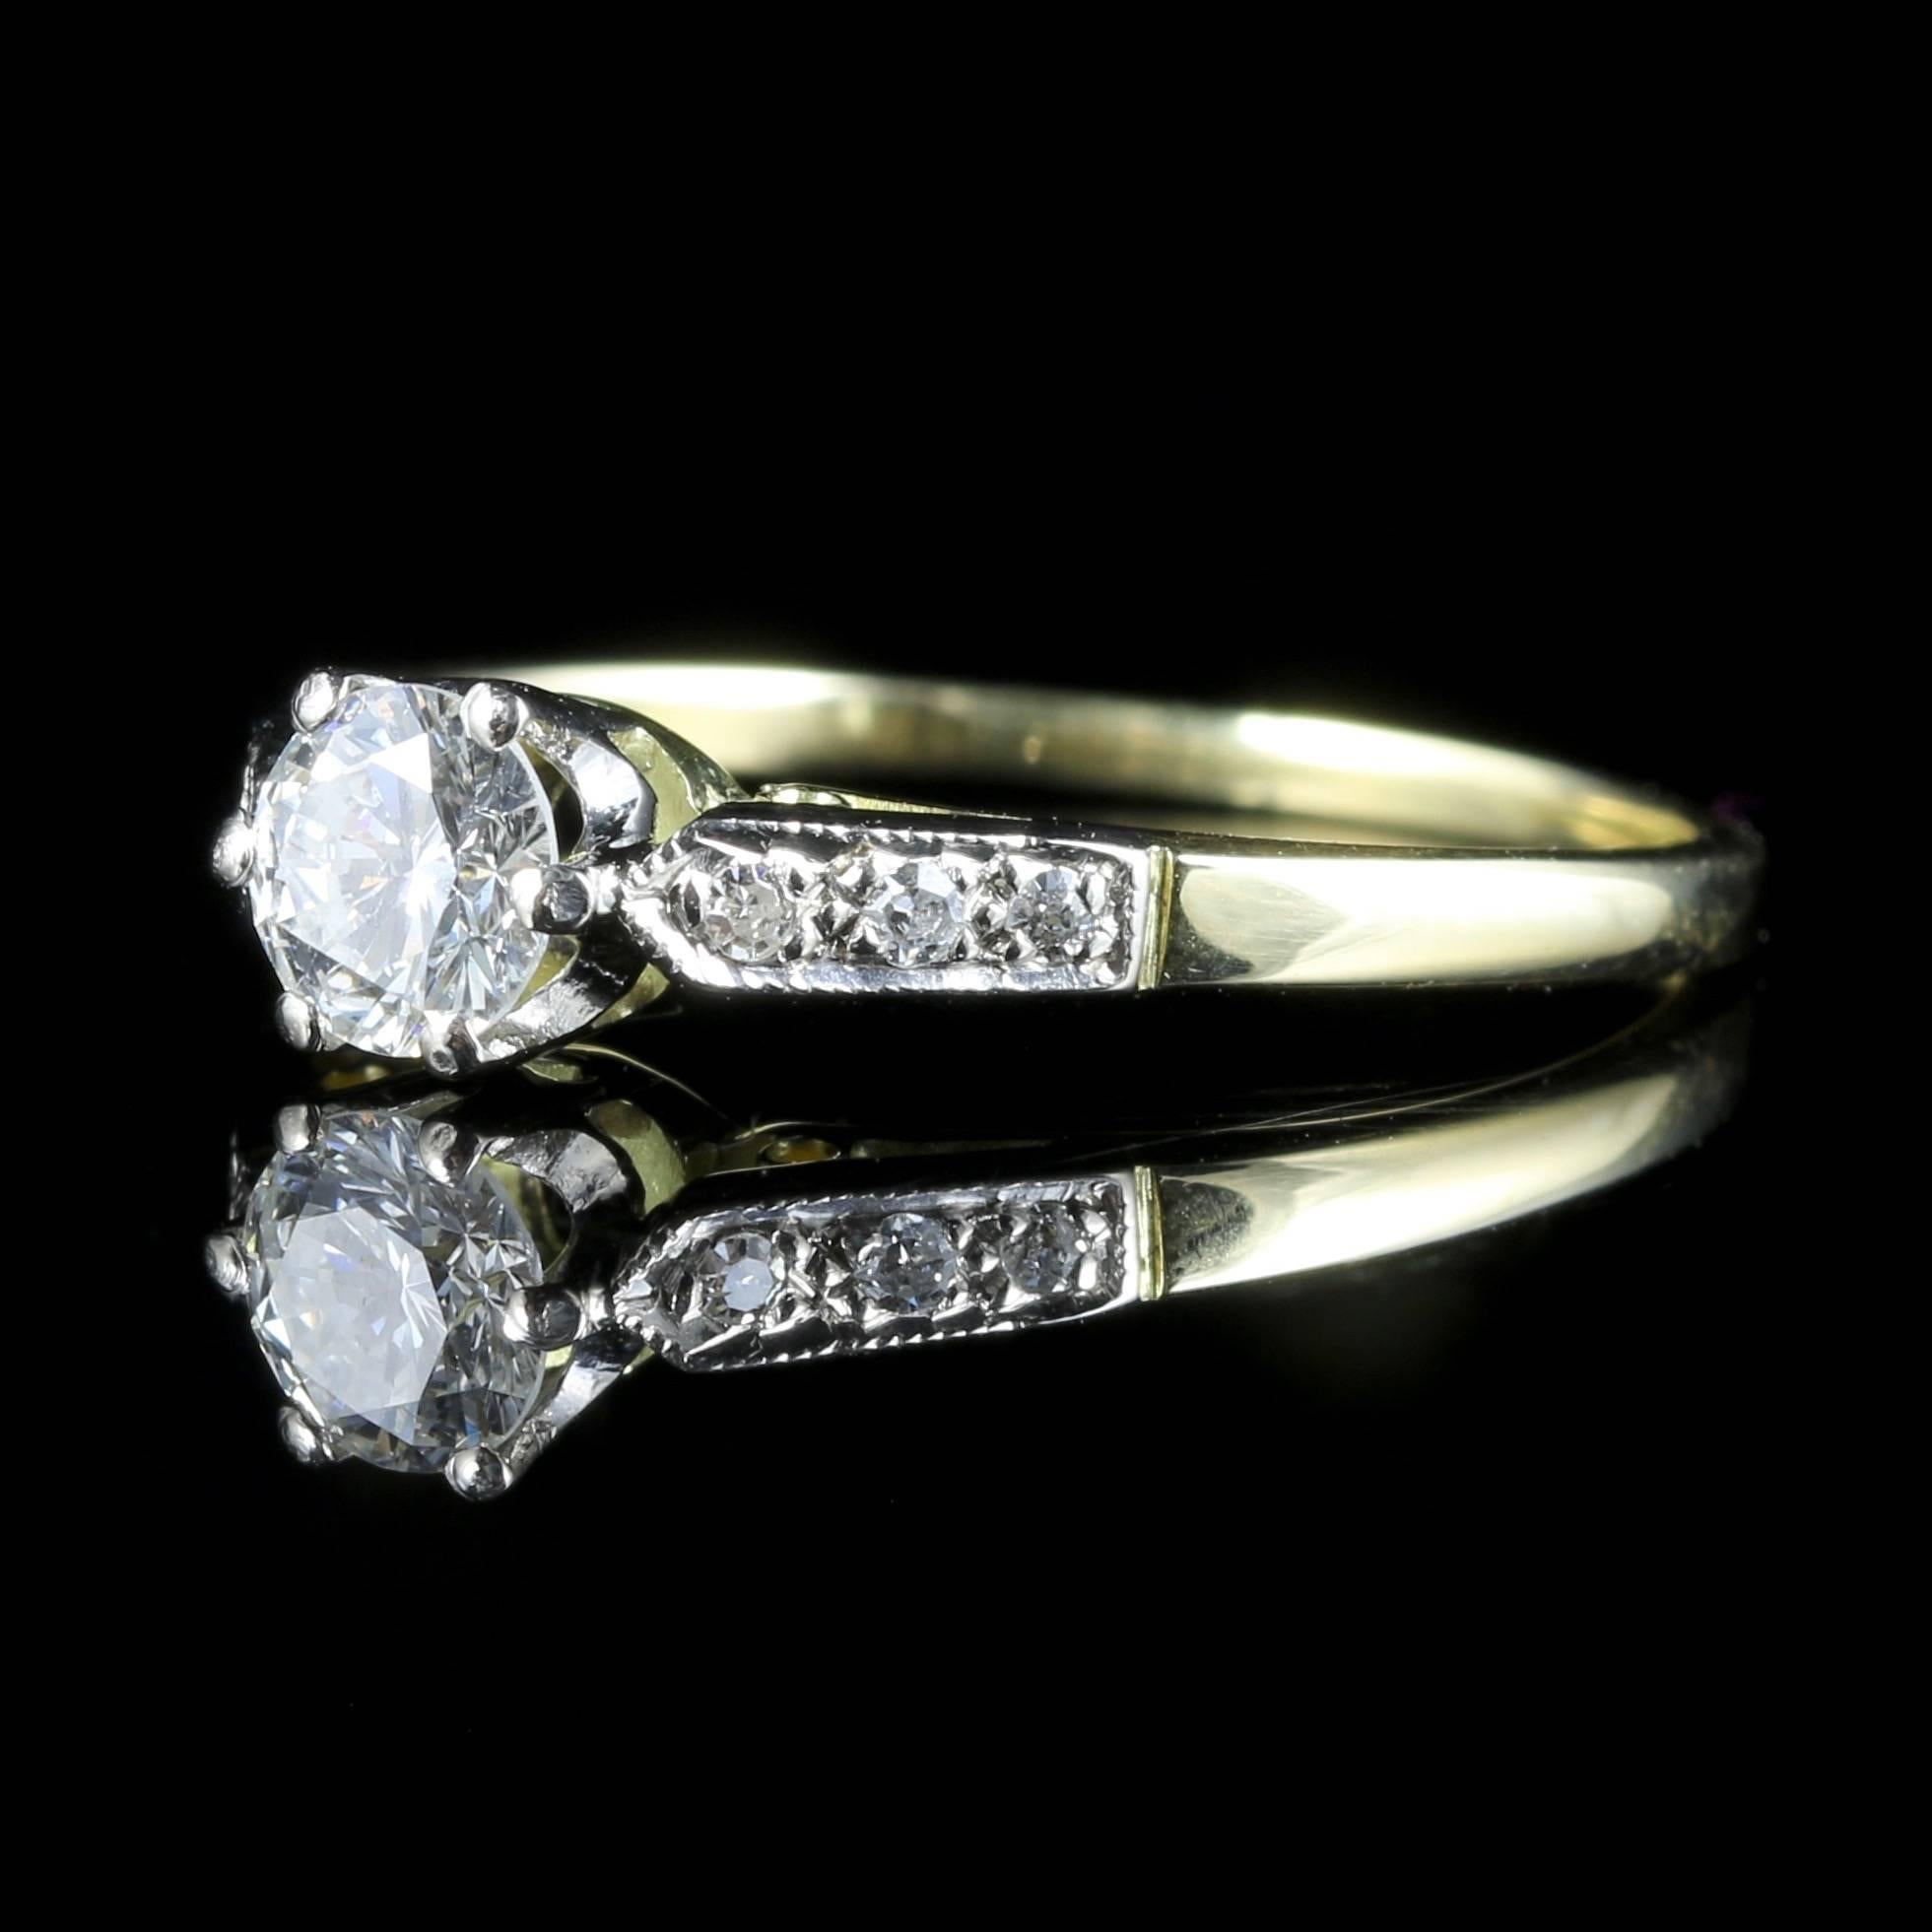 This beautiful Antique Edwardian ring is Circa 1915 and is set with a 0.60ct solitaire and old brilliant cut Diamonds down each shoulder which are another 0.12ct 

The Diamond weight is 0.72ct in total.

The lovely bright white central Diamond is SI